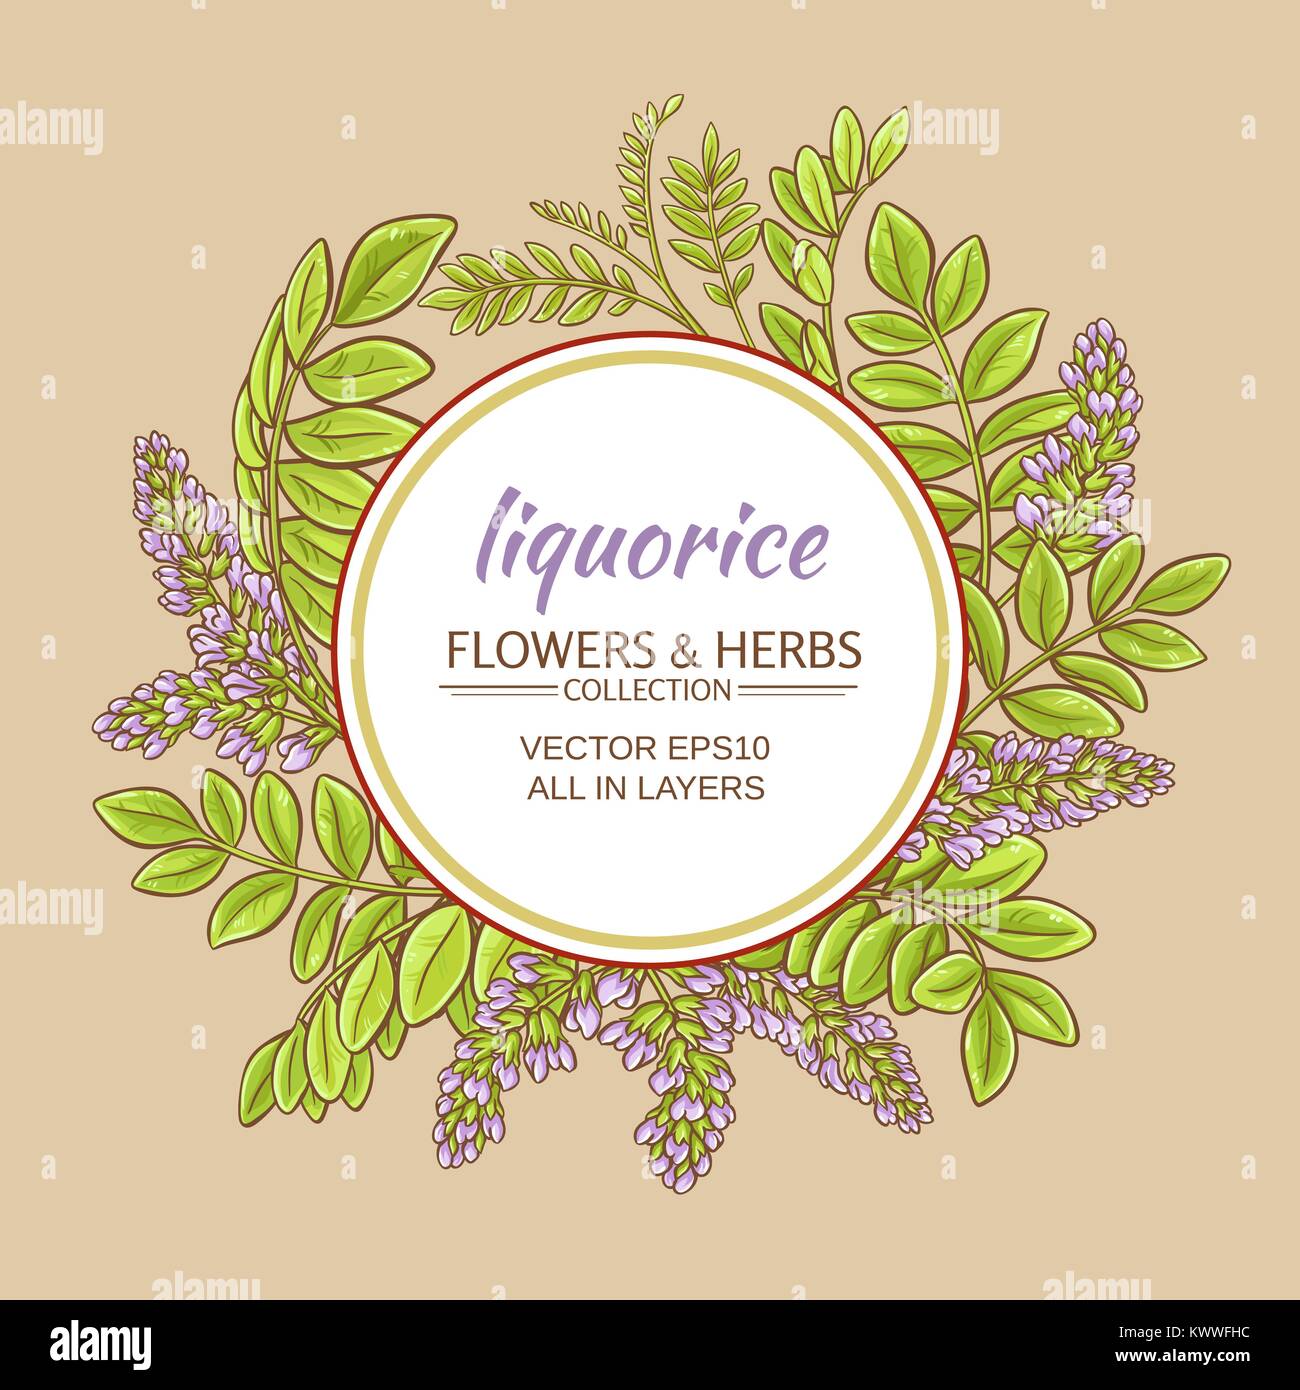 liquorise plant vector frame on color background Stock Vector